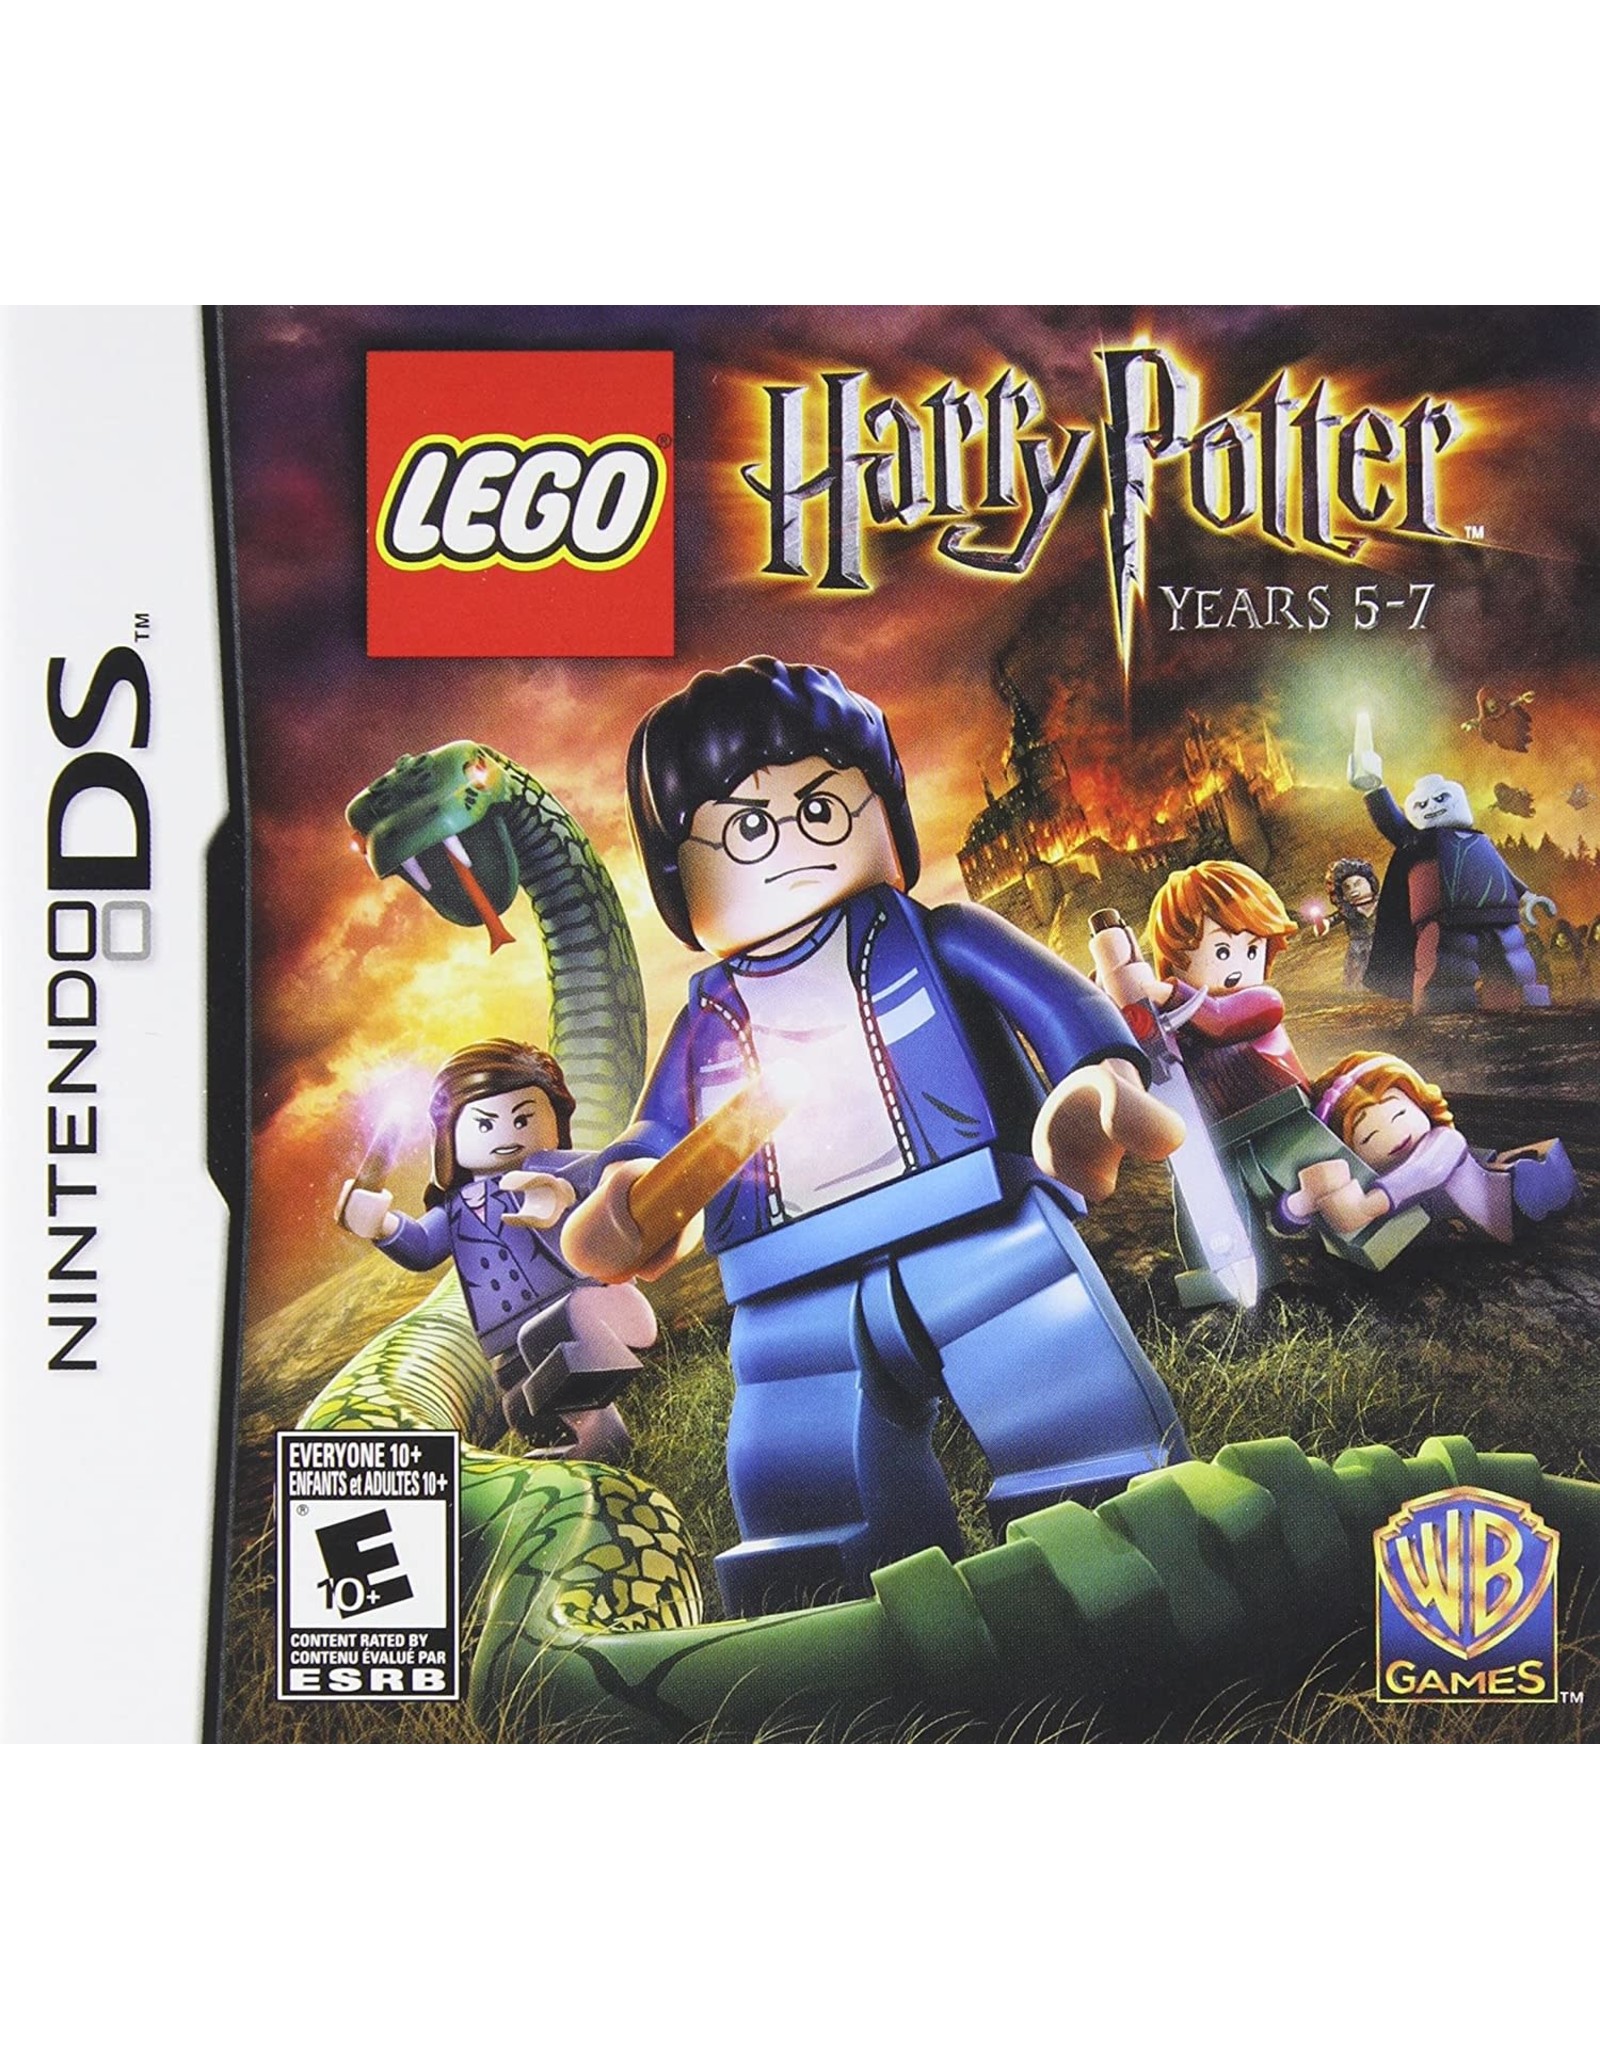 Nintendo DS LEGO Harry Potter Years 5-7 (Cart Only)